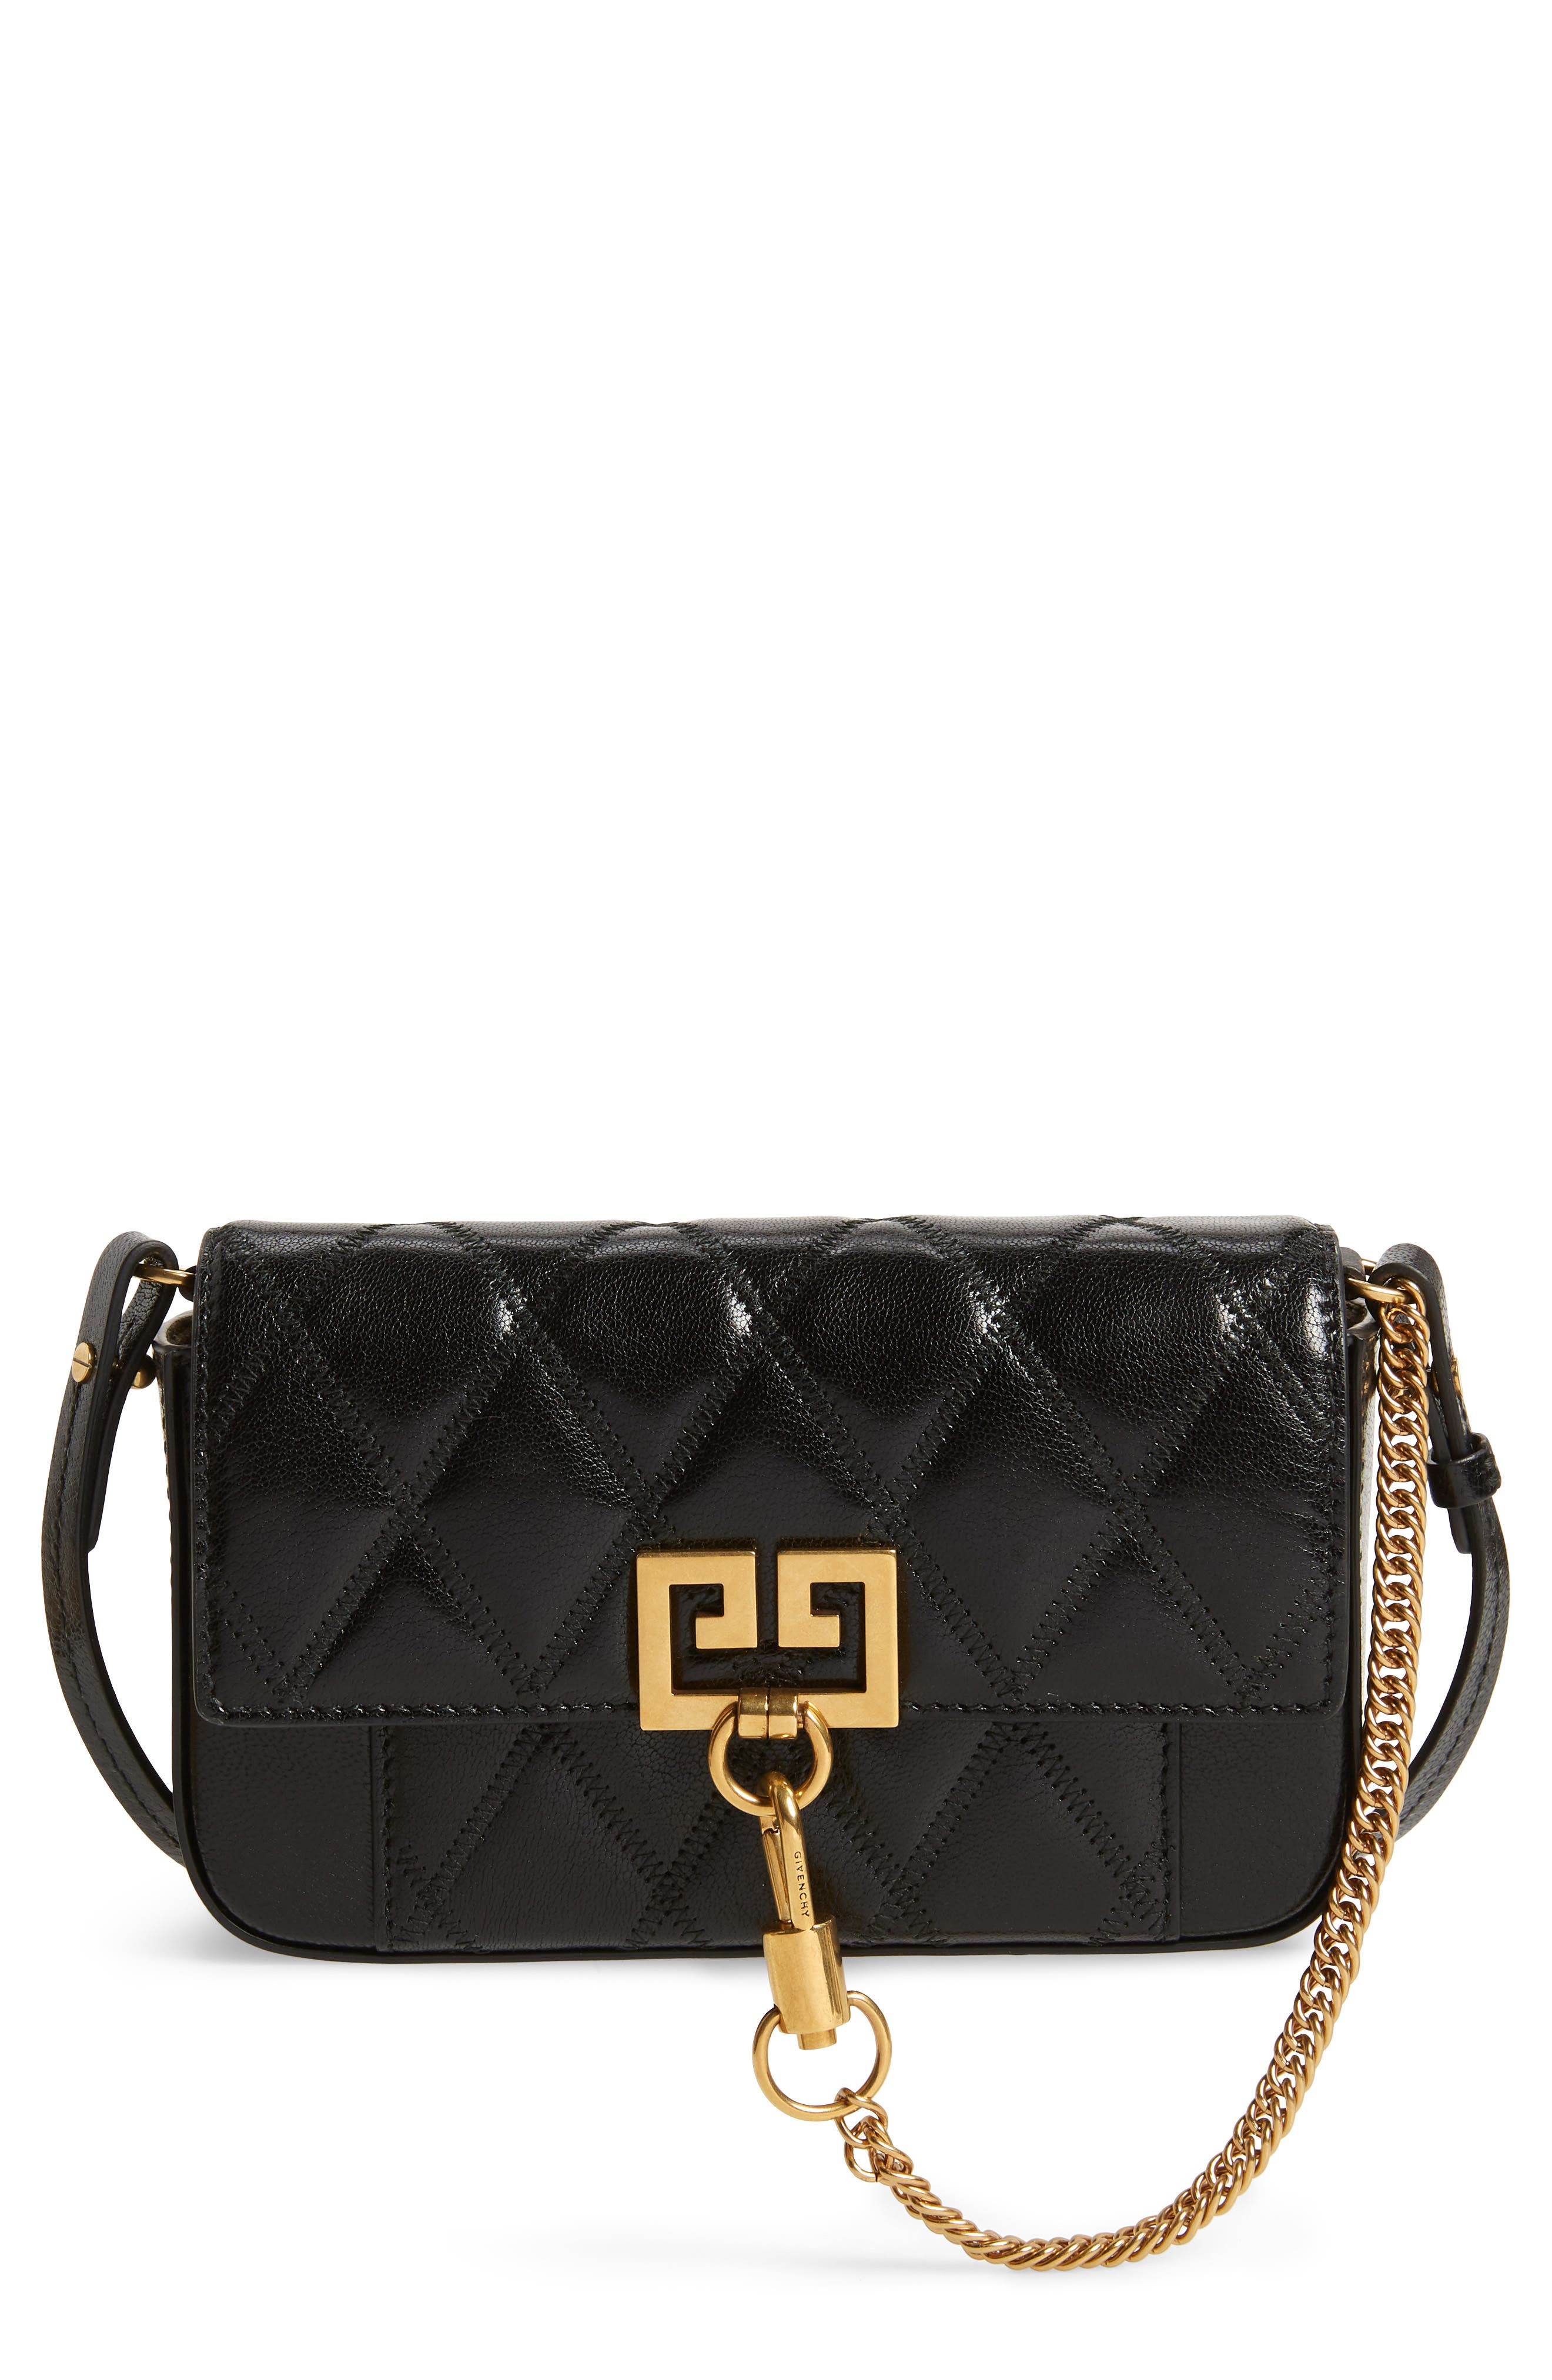 givenchy mini pocket bag in diamond quilted leather